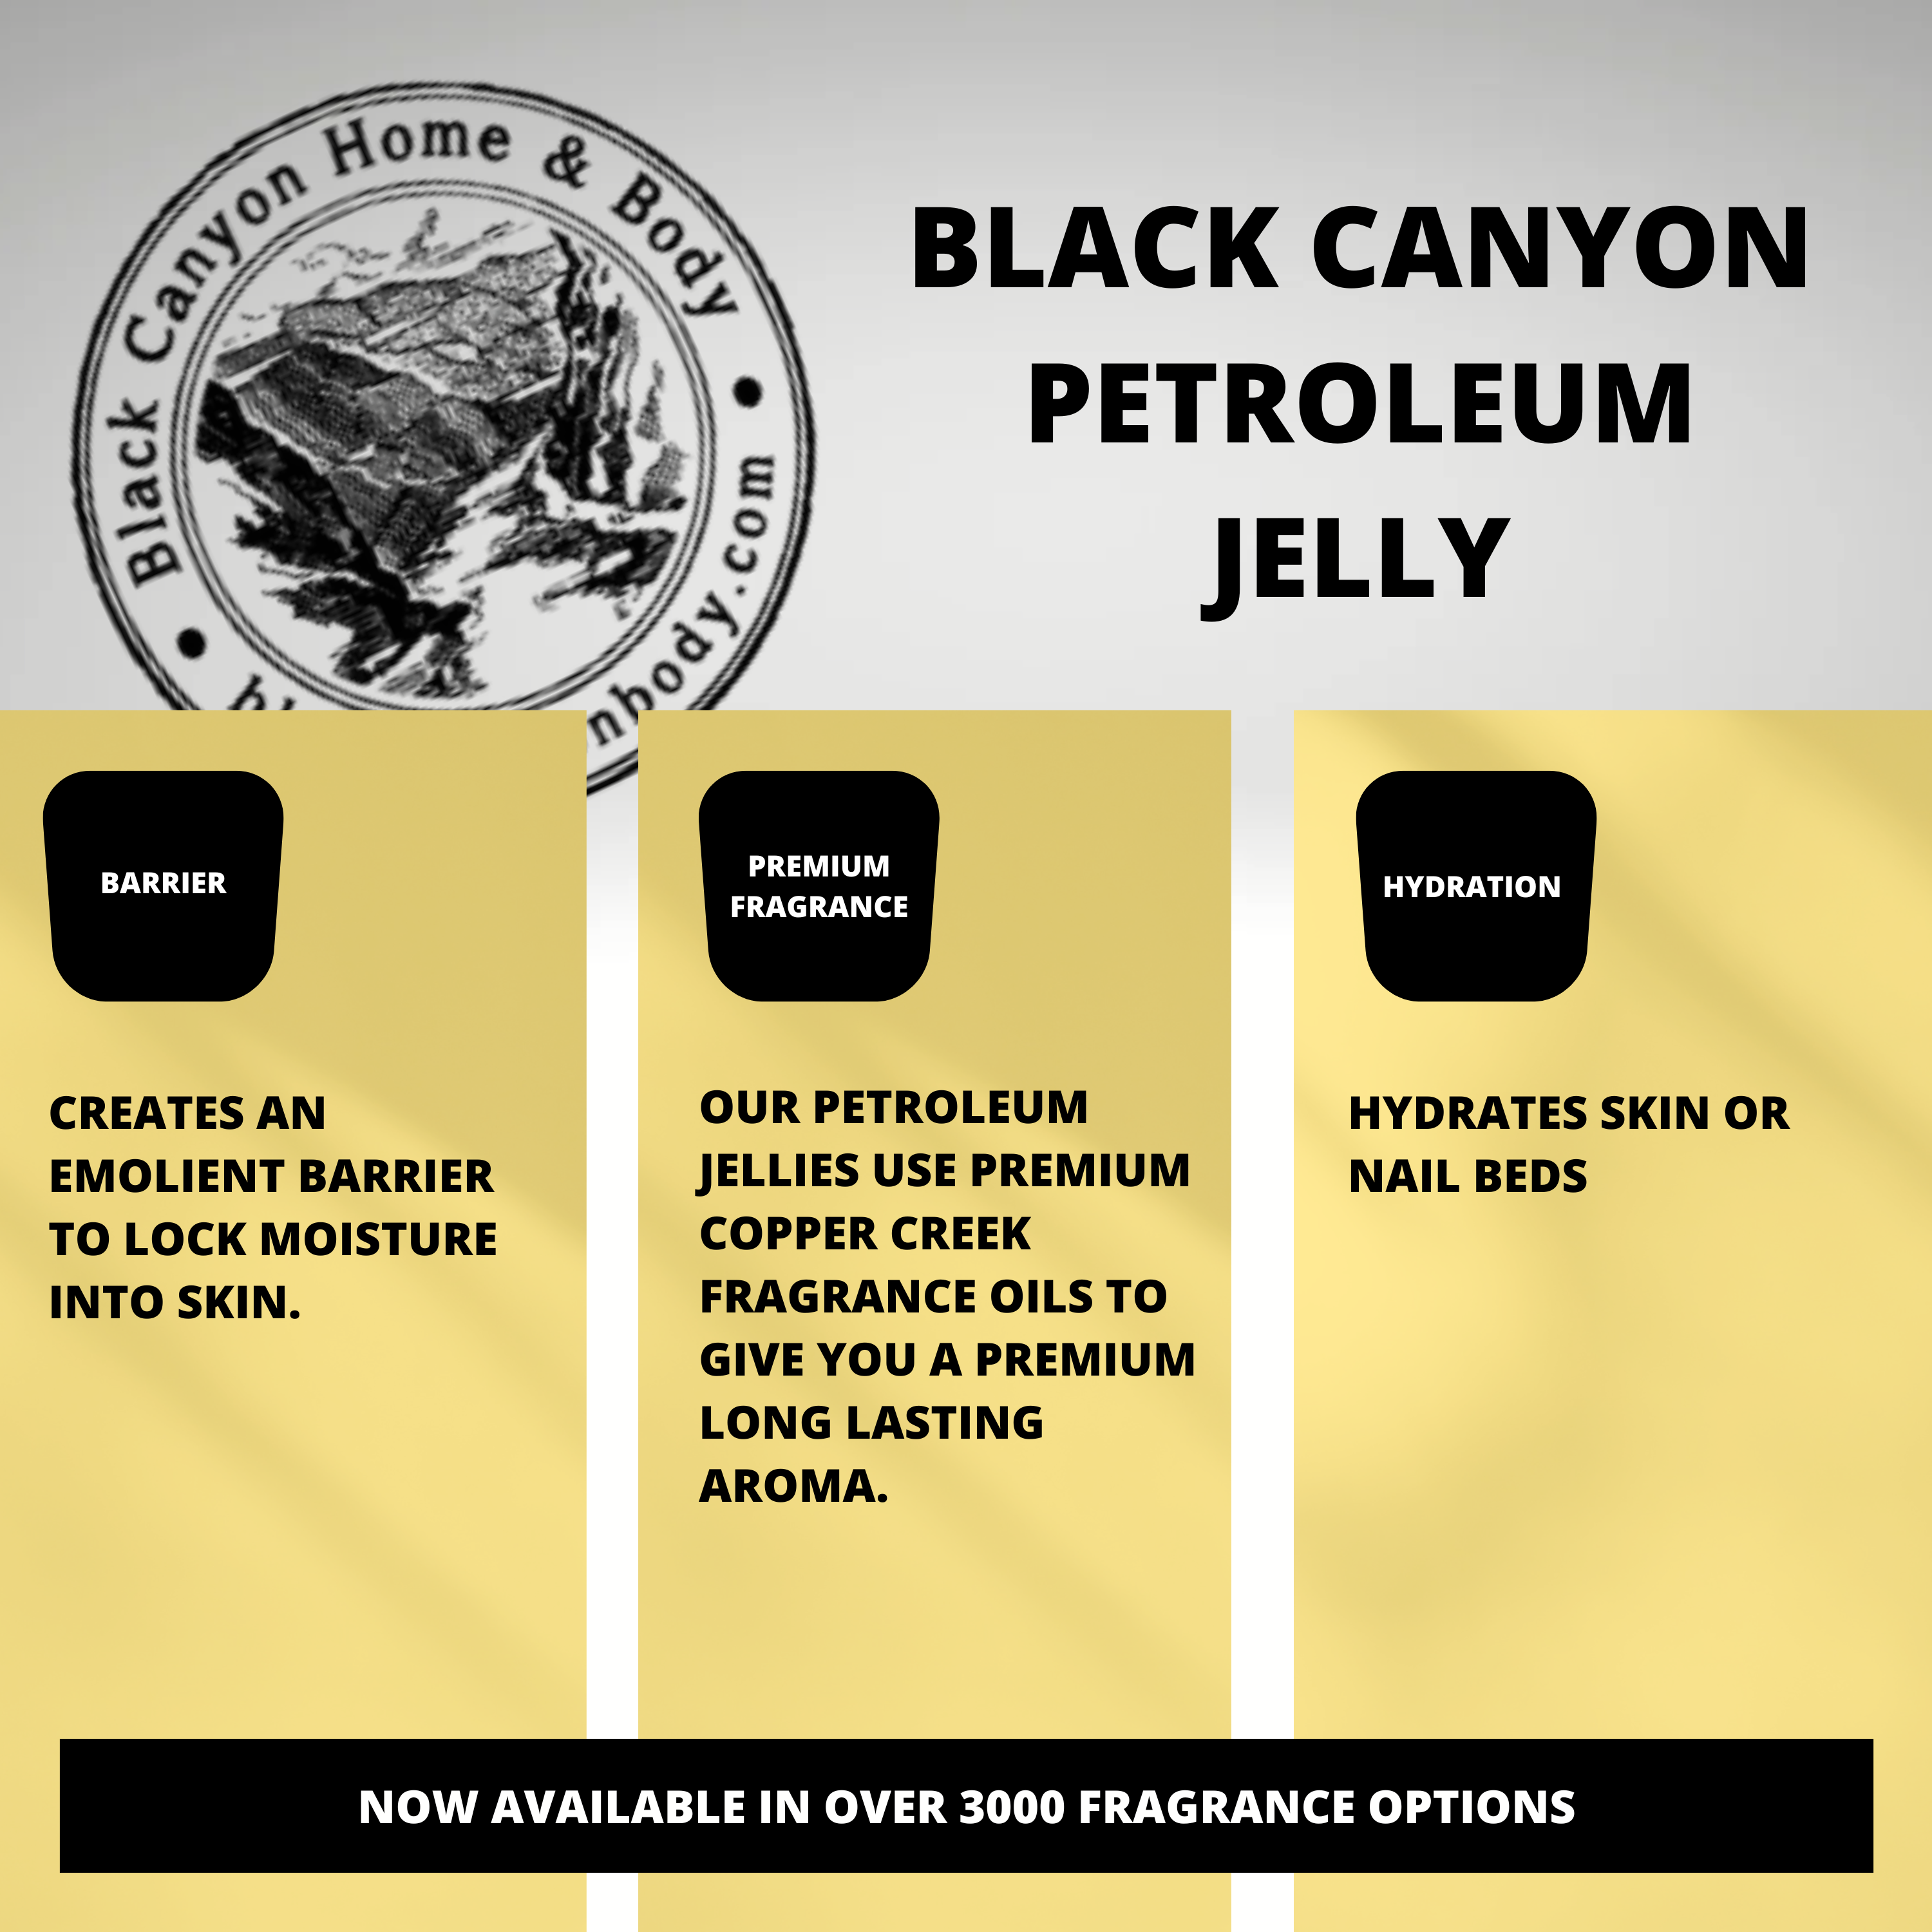 Black Canyon Chocolate & Musk Scented Petroleum Jelly